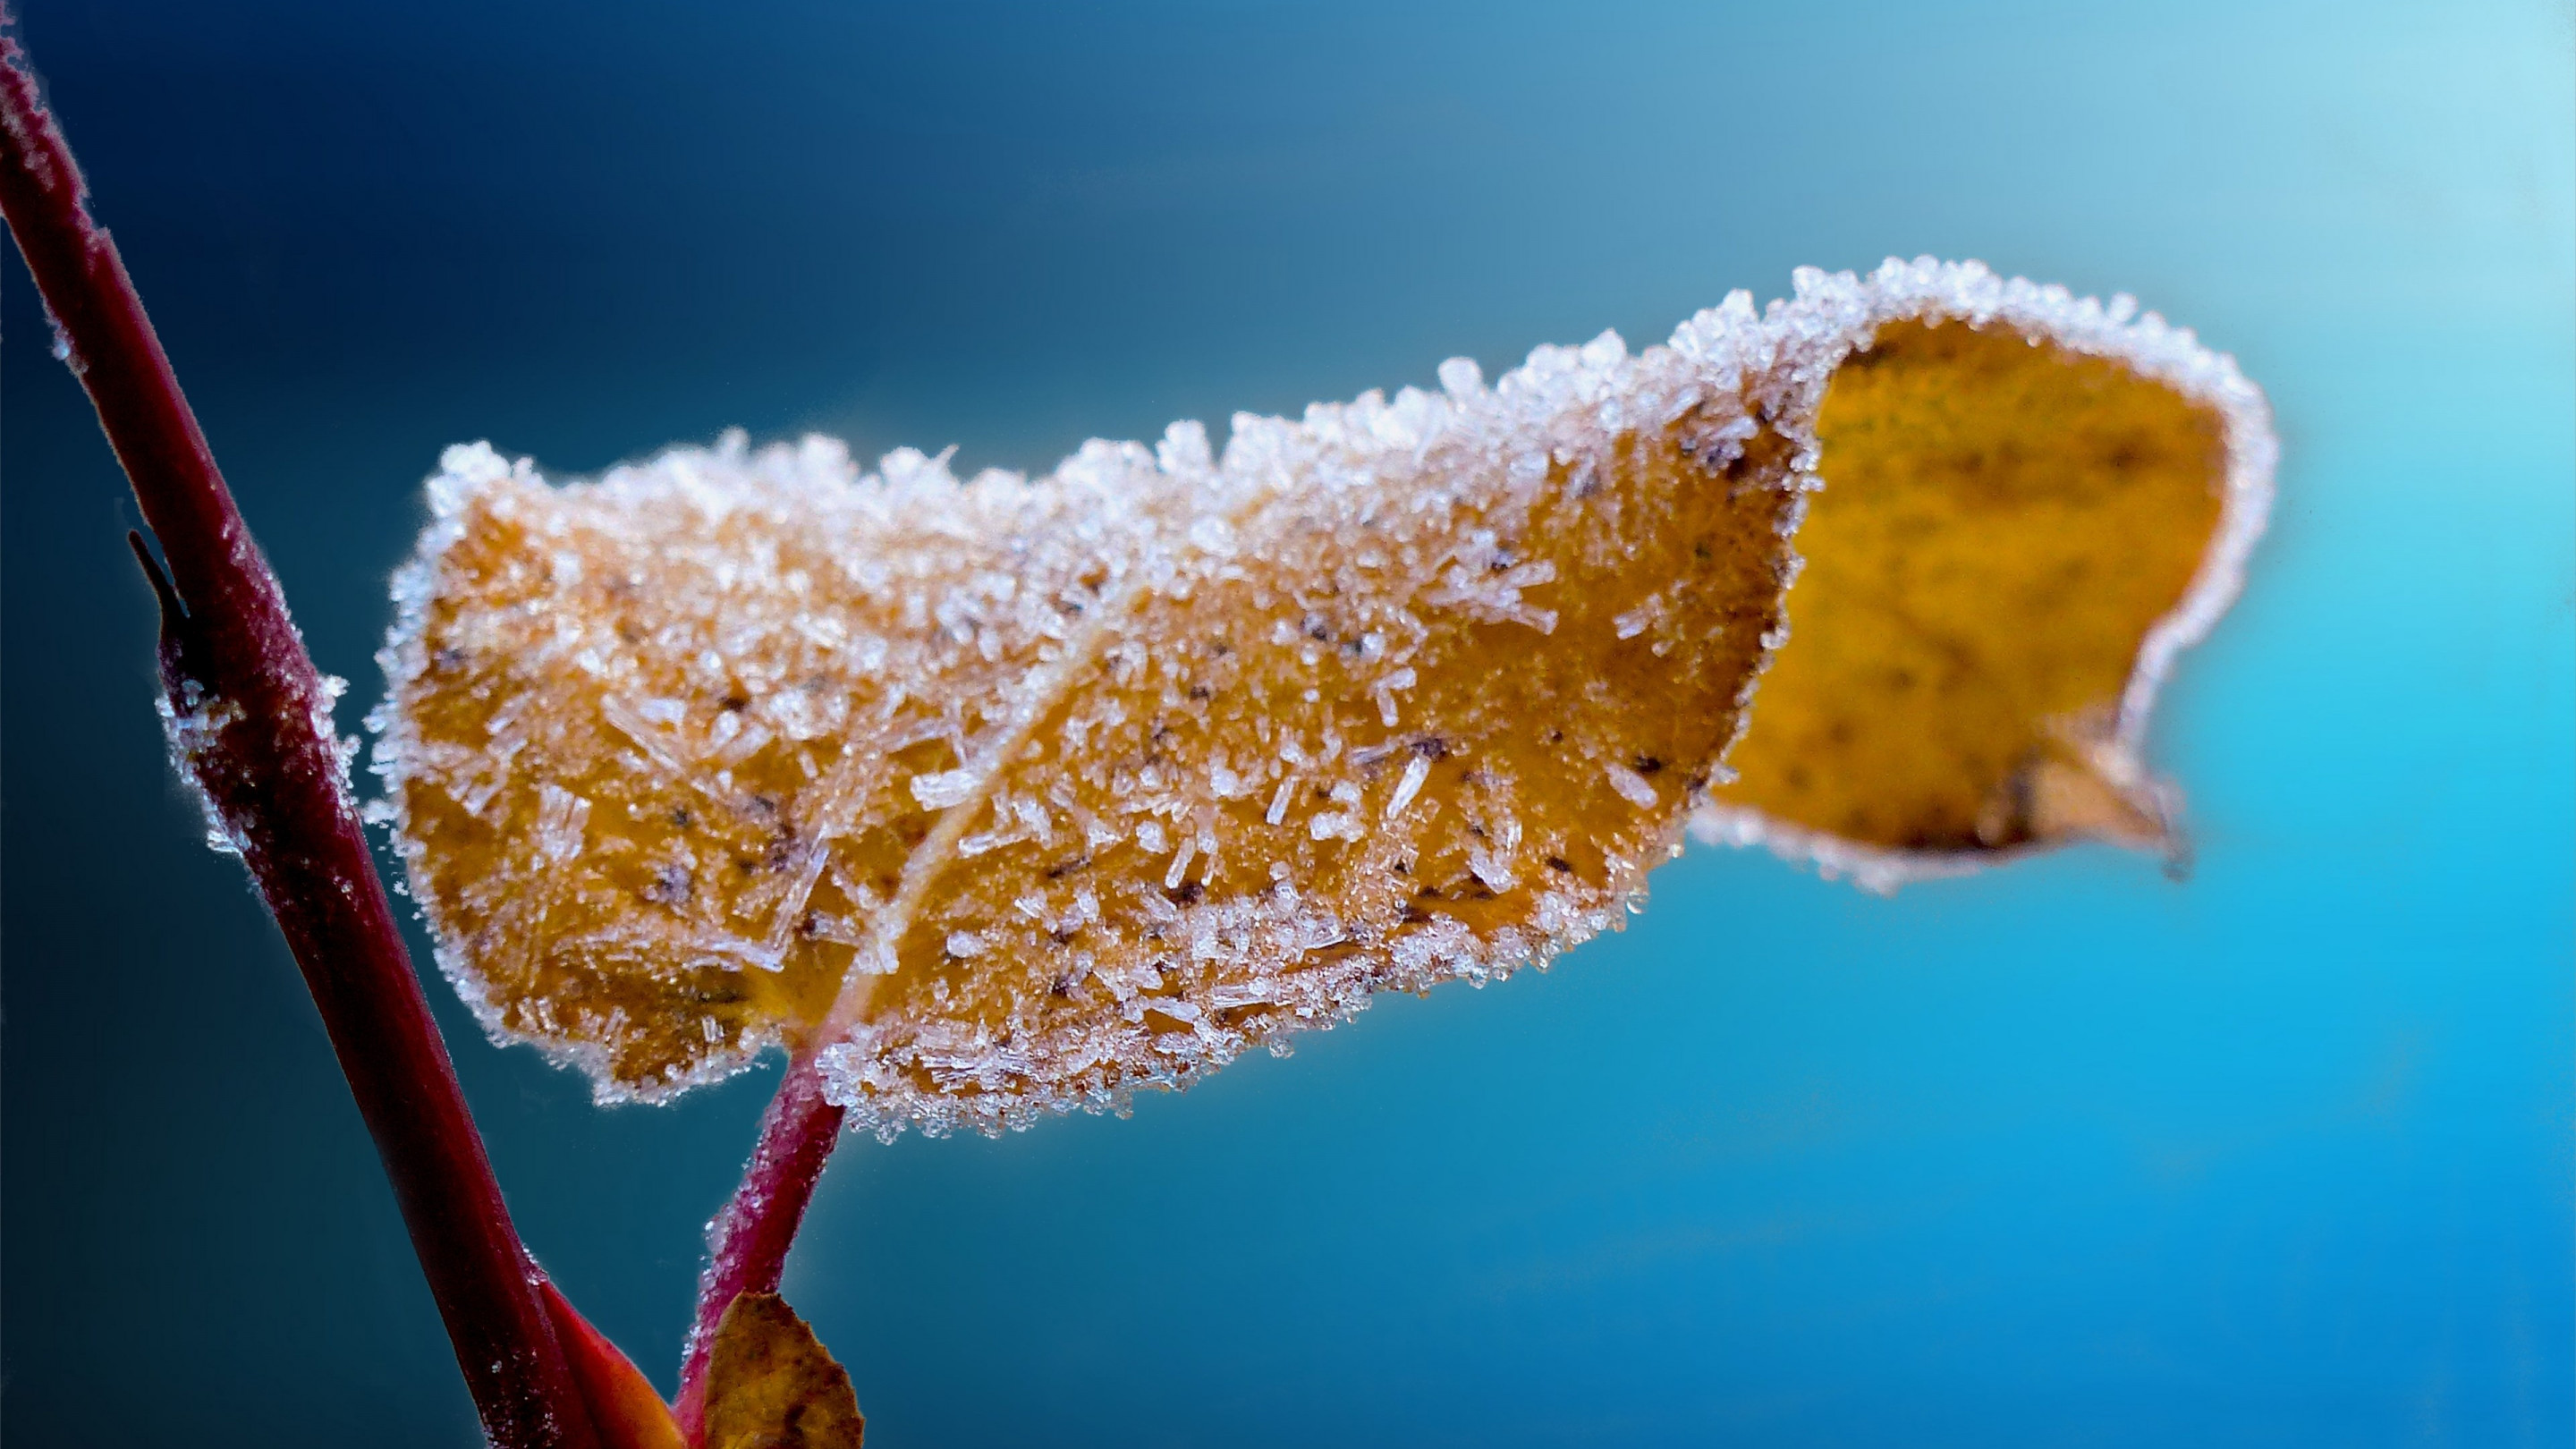 Frosted leaf wallpaper 2880x1620